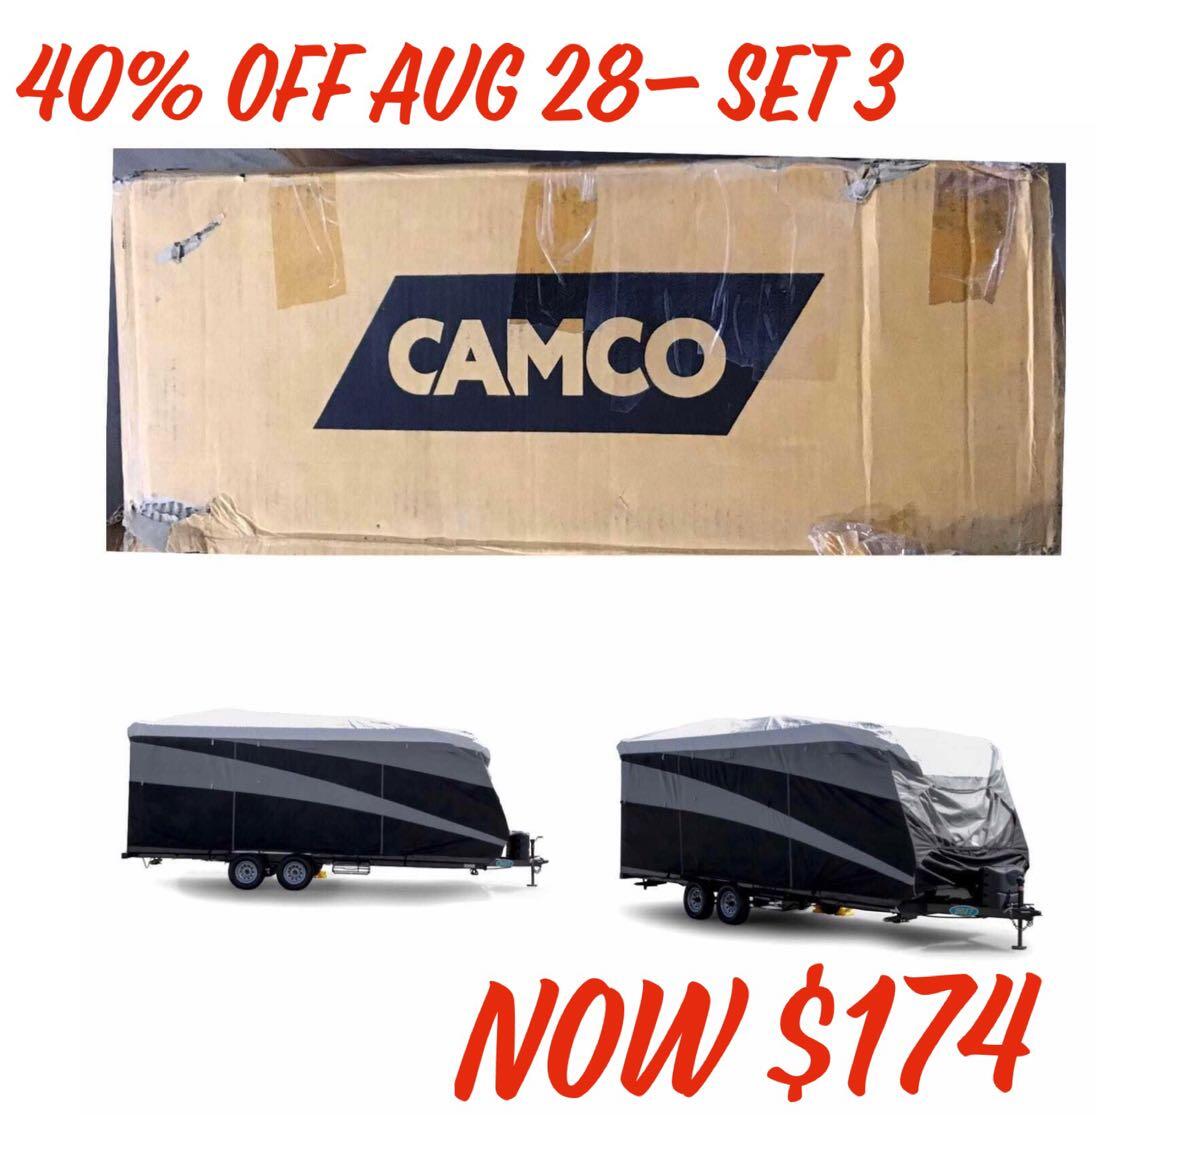 Camco ULTRAGuard Supreme RV Cover Fits Travel Trailers 20'-22' (56126)  For $290 In Missouri City, TX For Sale  Free — Nextdoor